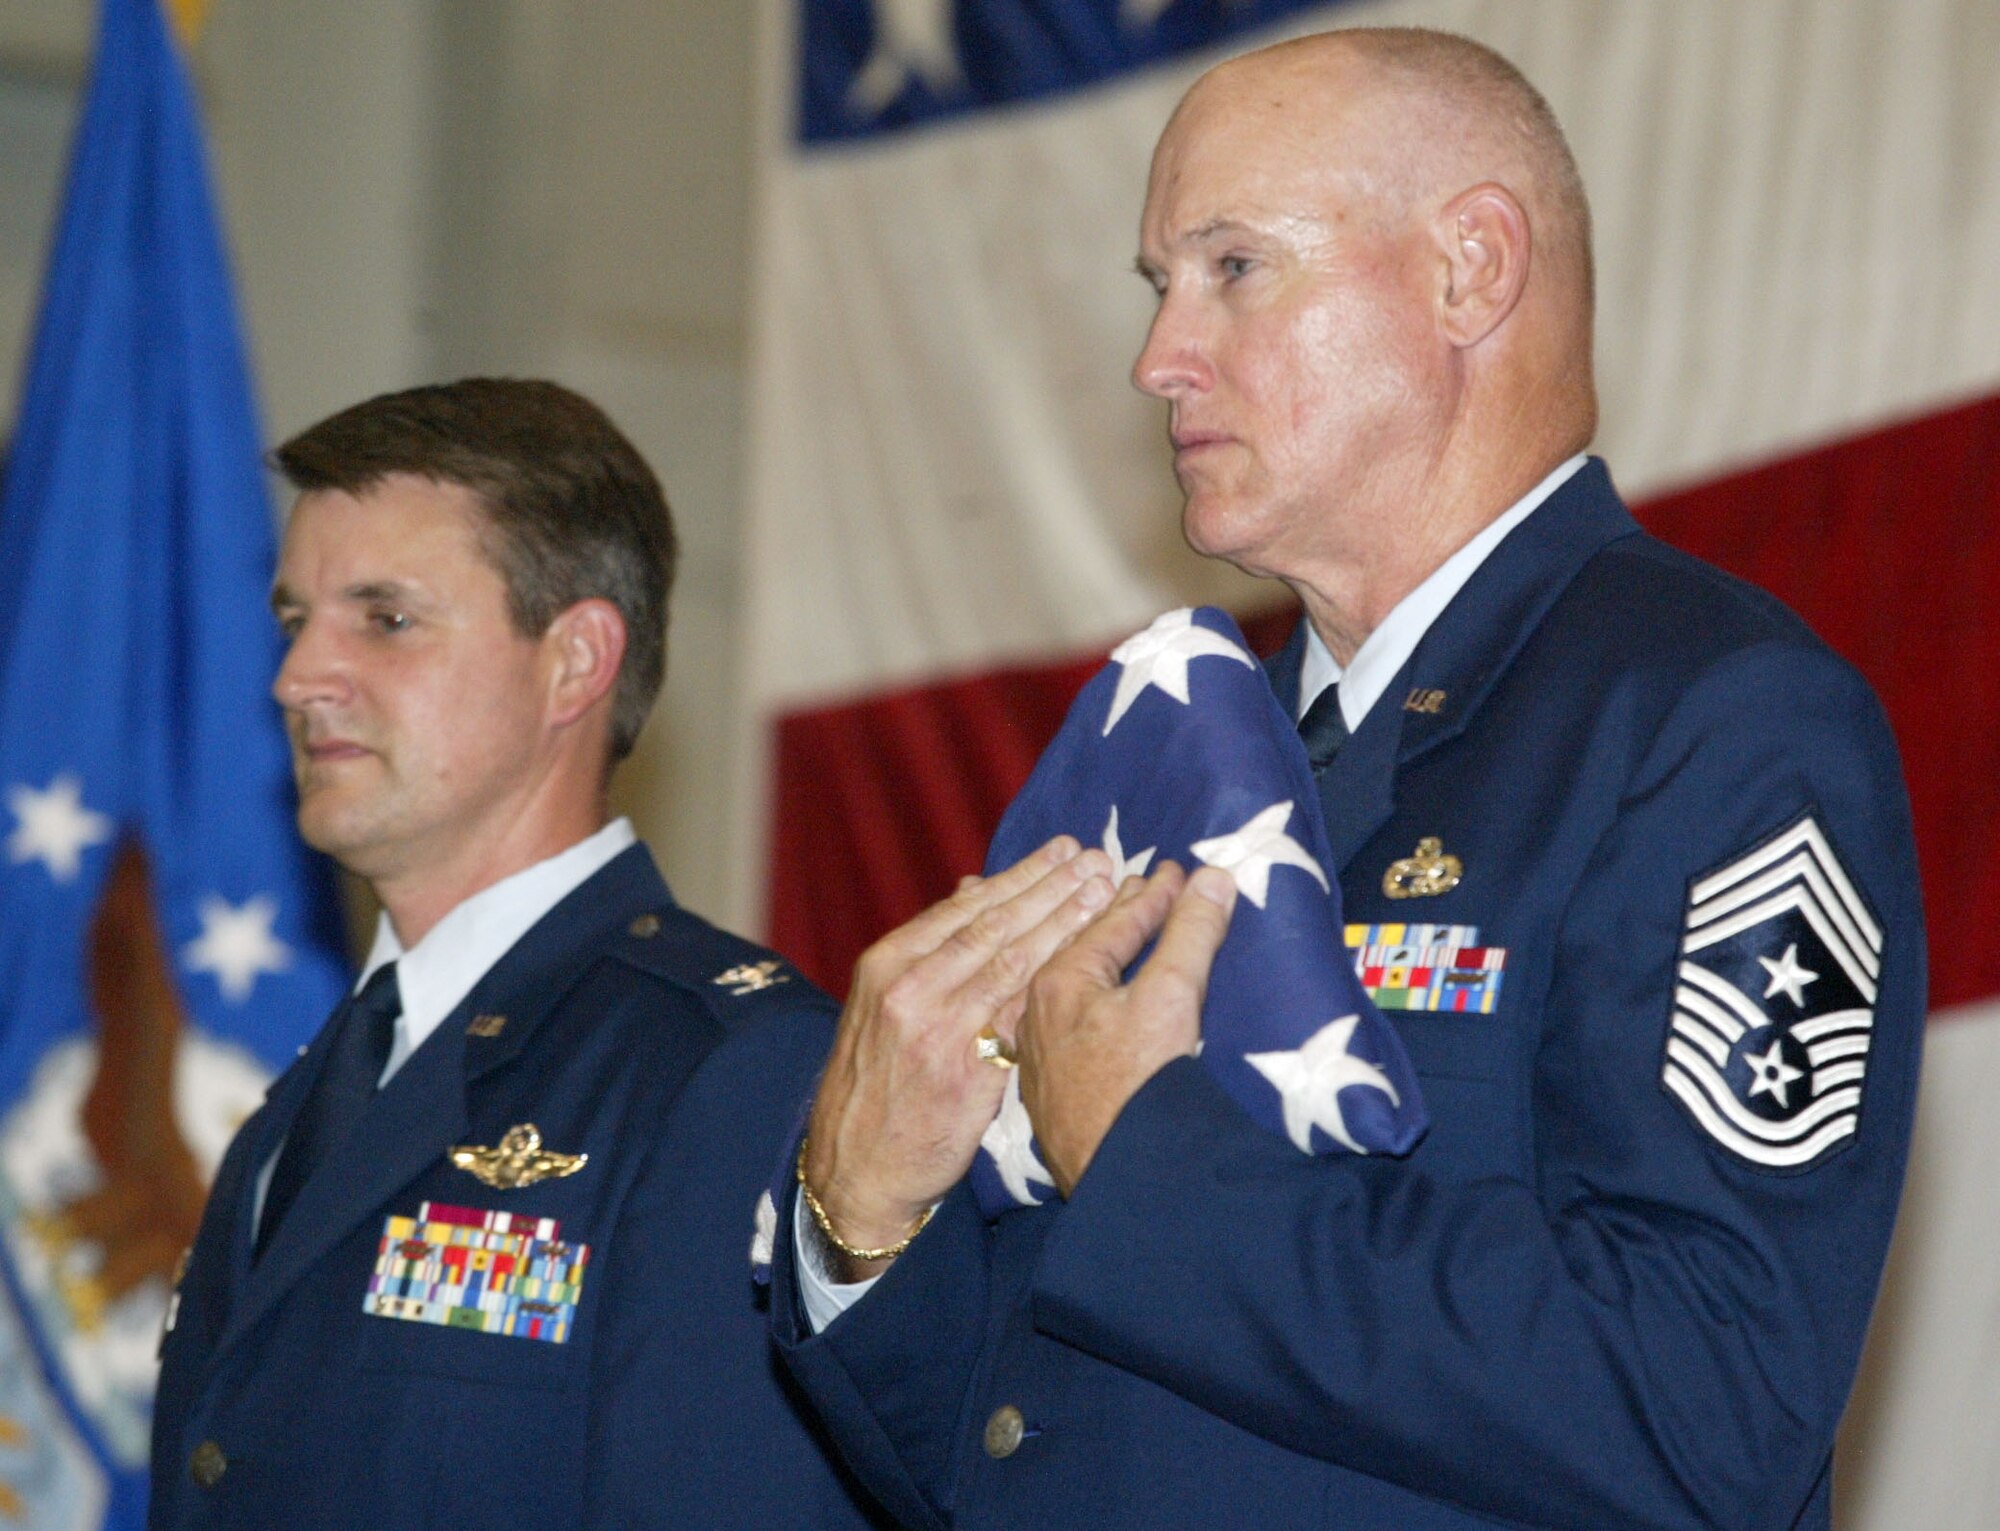 94th Airlift Wing Command Chief James Michael West holds the retirement flag given to him during his retirement ceremony on the August unit training assembly.  To his right, Col. Heath Nuckolls, 94th Airlift Wing commander, officiated the ceremony.